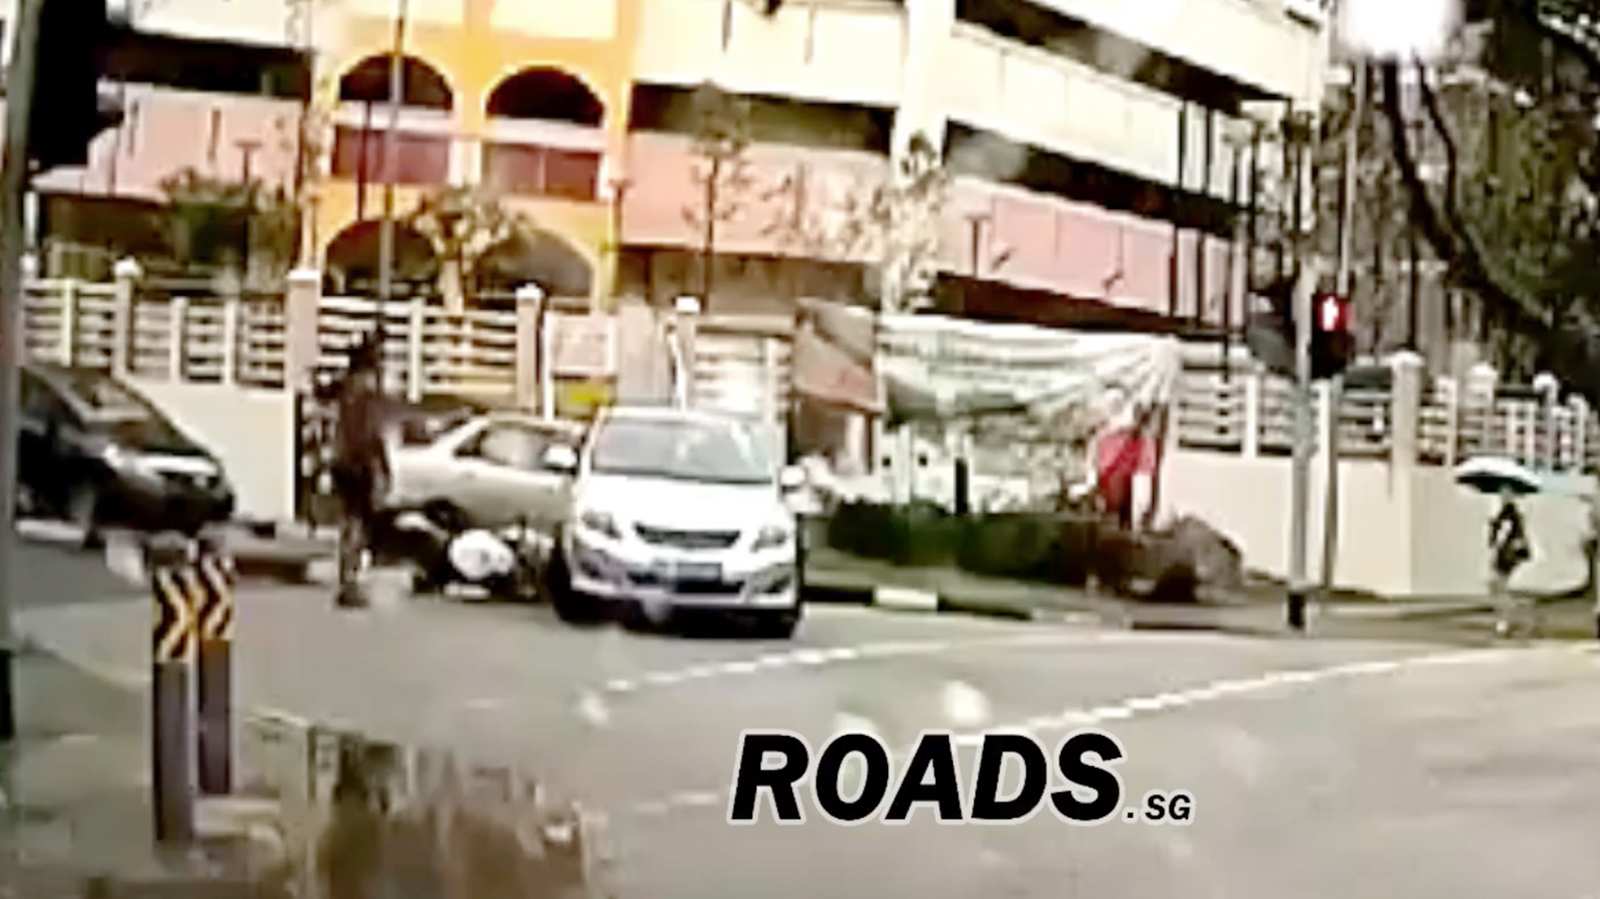 Good samaritan goes out of his way to help motorcyclist involved in accident